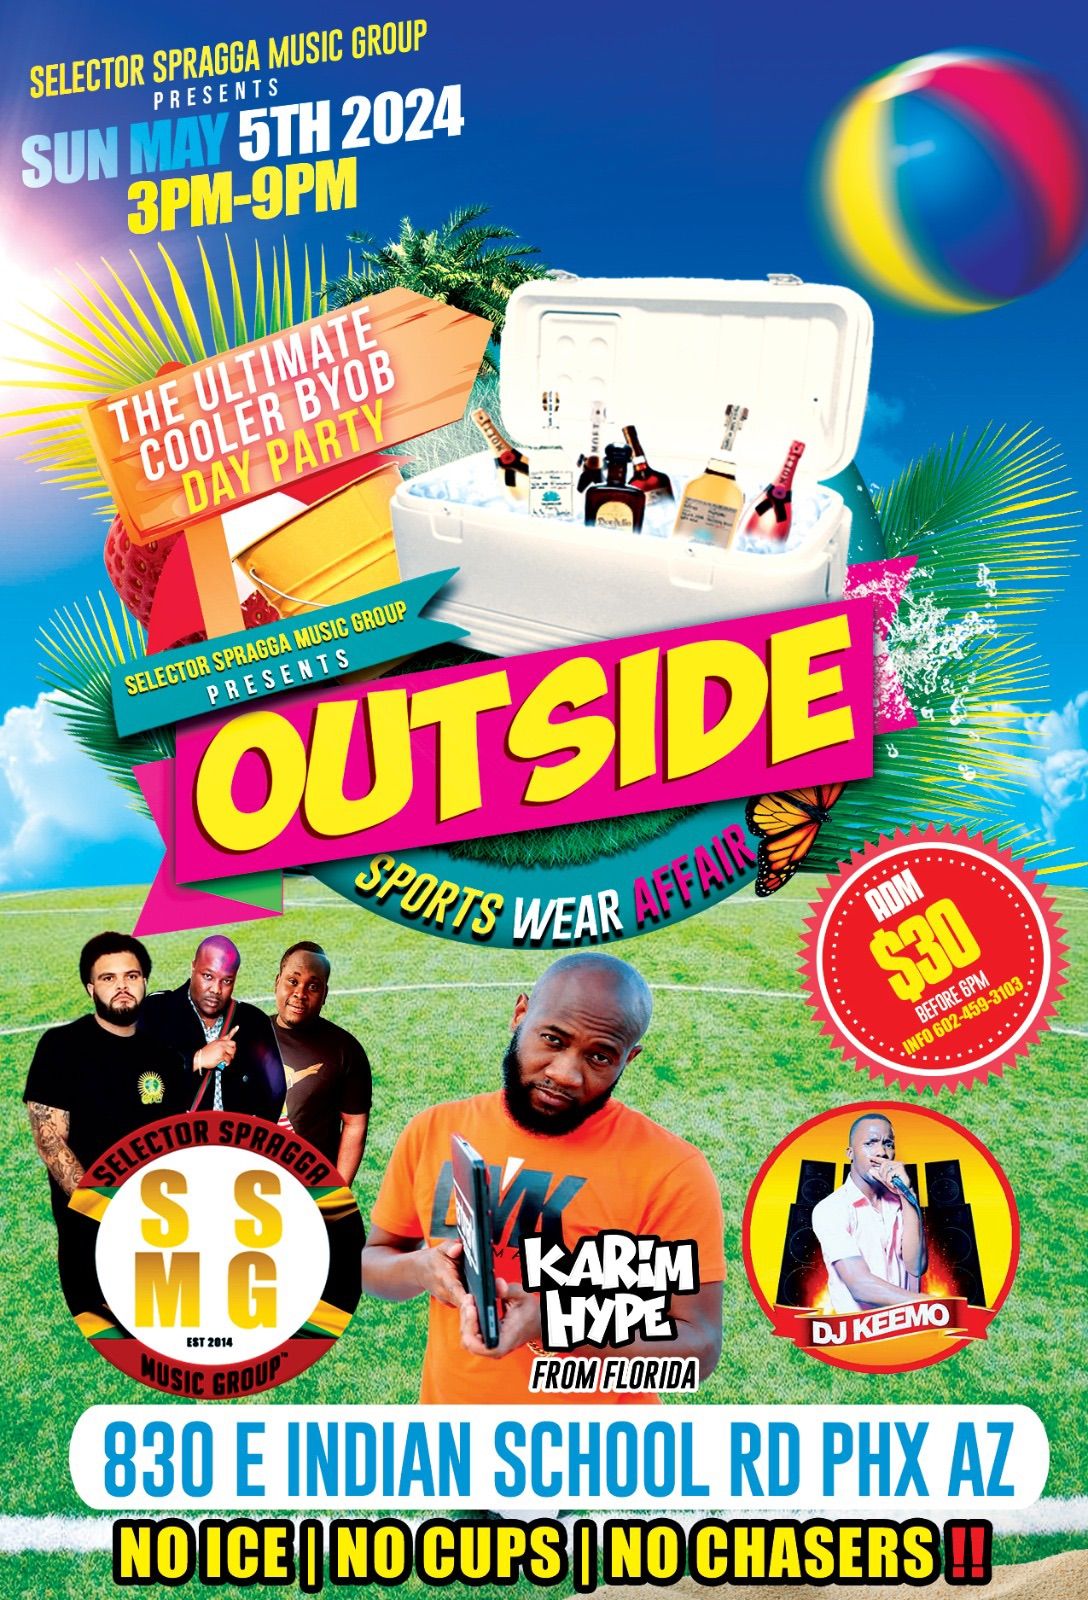 Outside day party ( sports wear affair ) this Sunday 